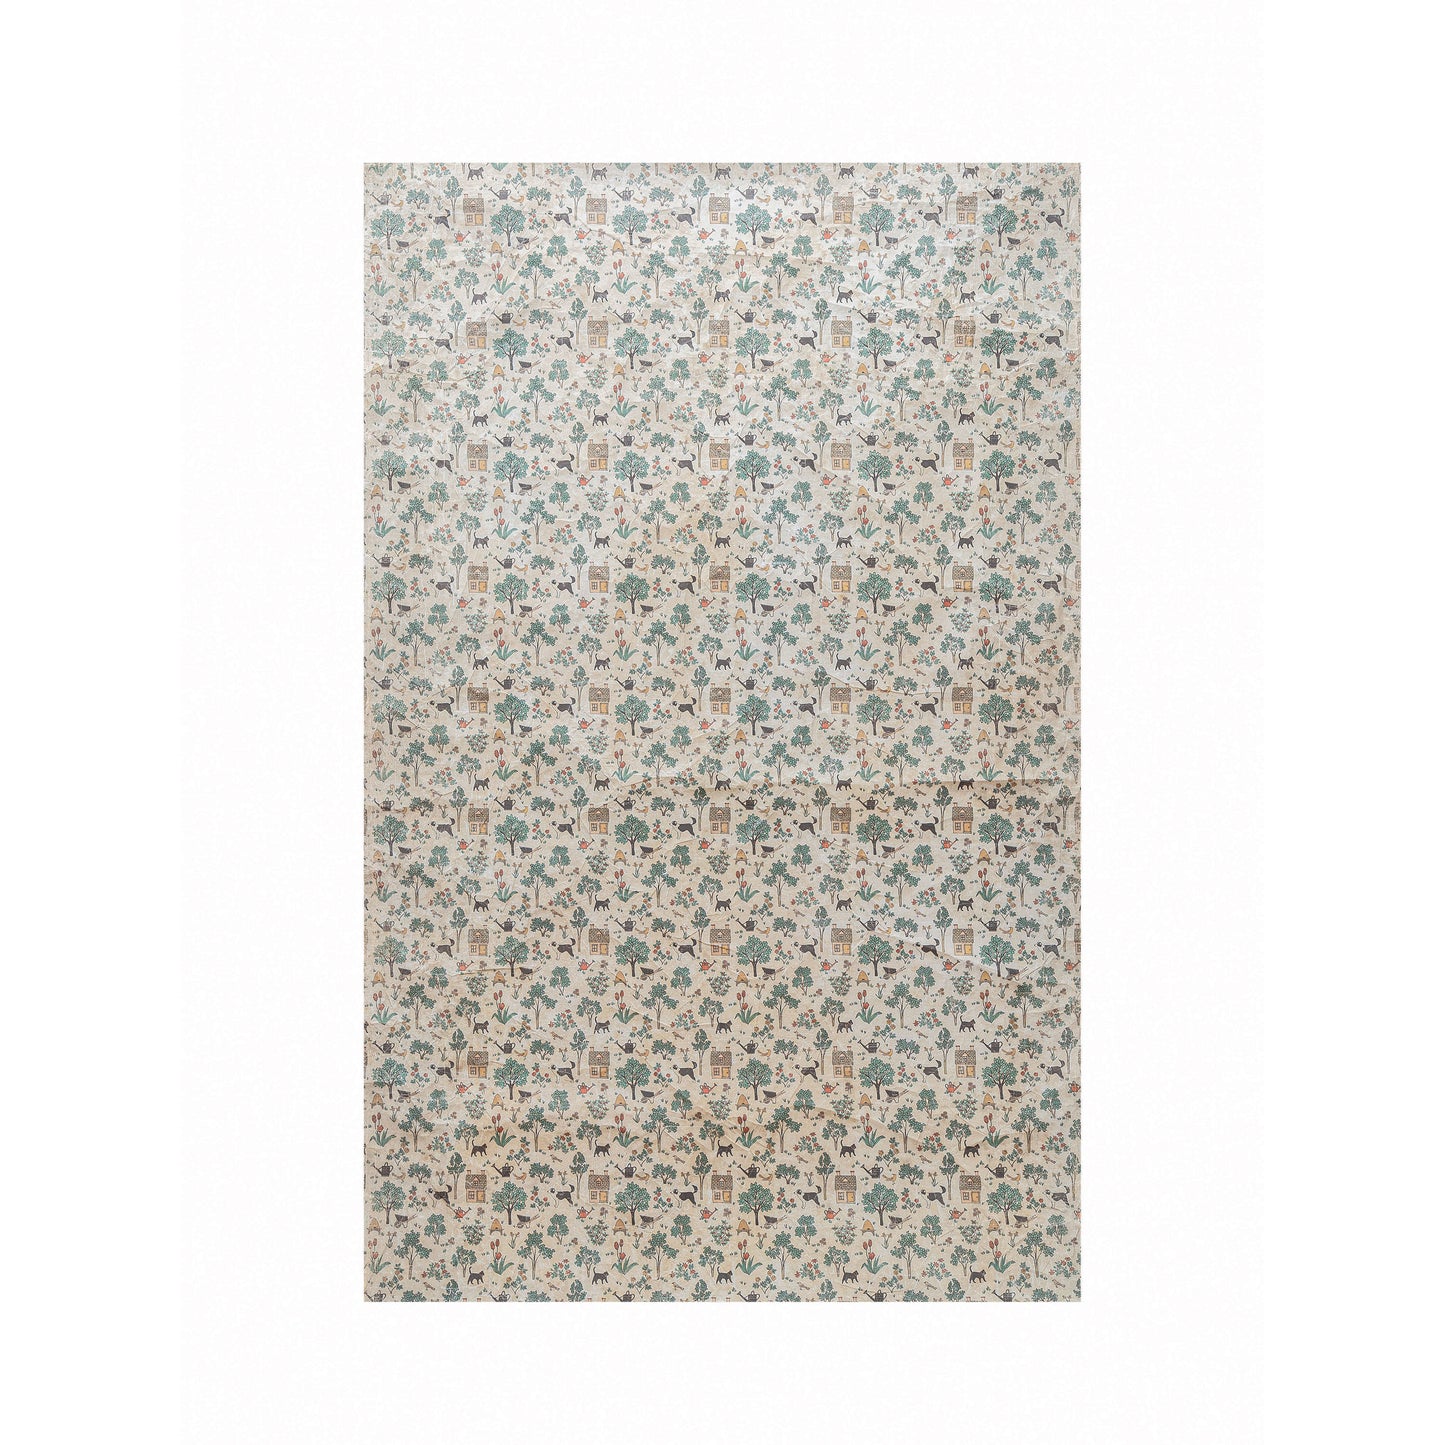 Decorator Paper with Cottage Pattern